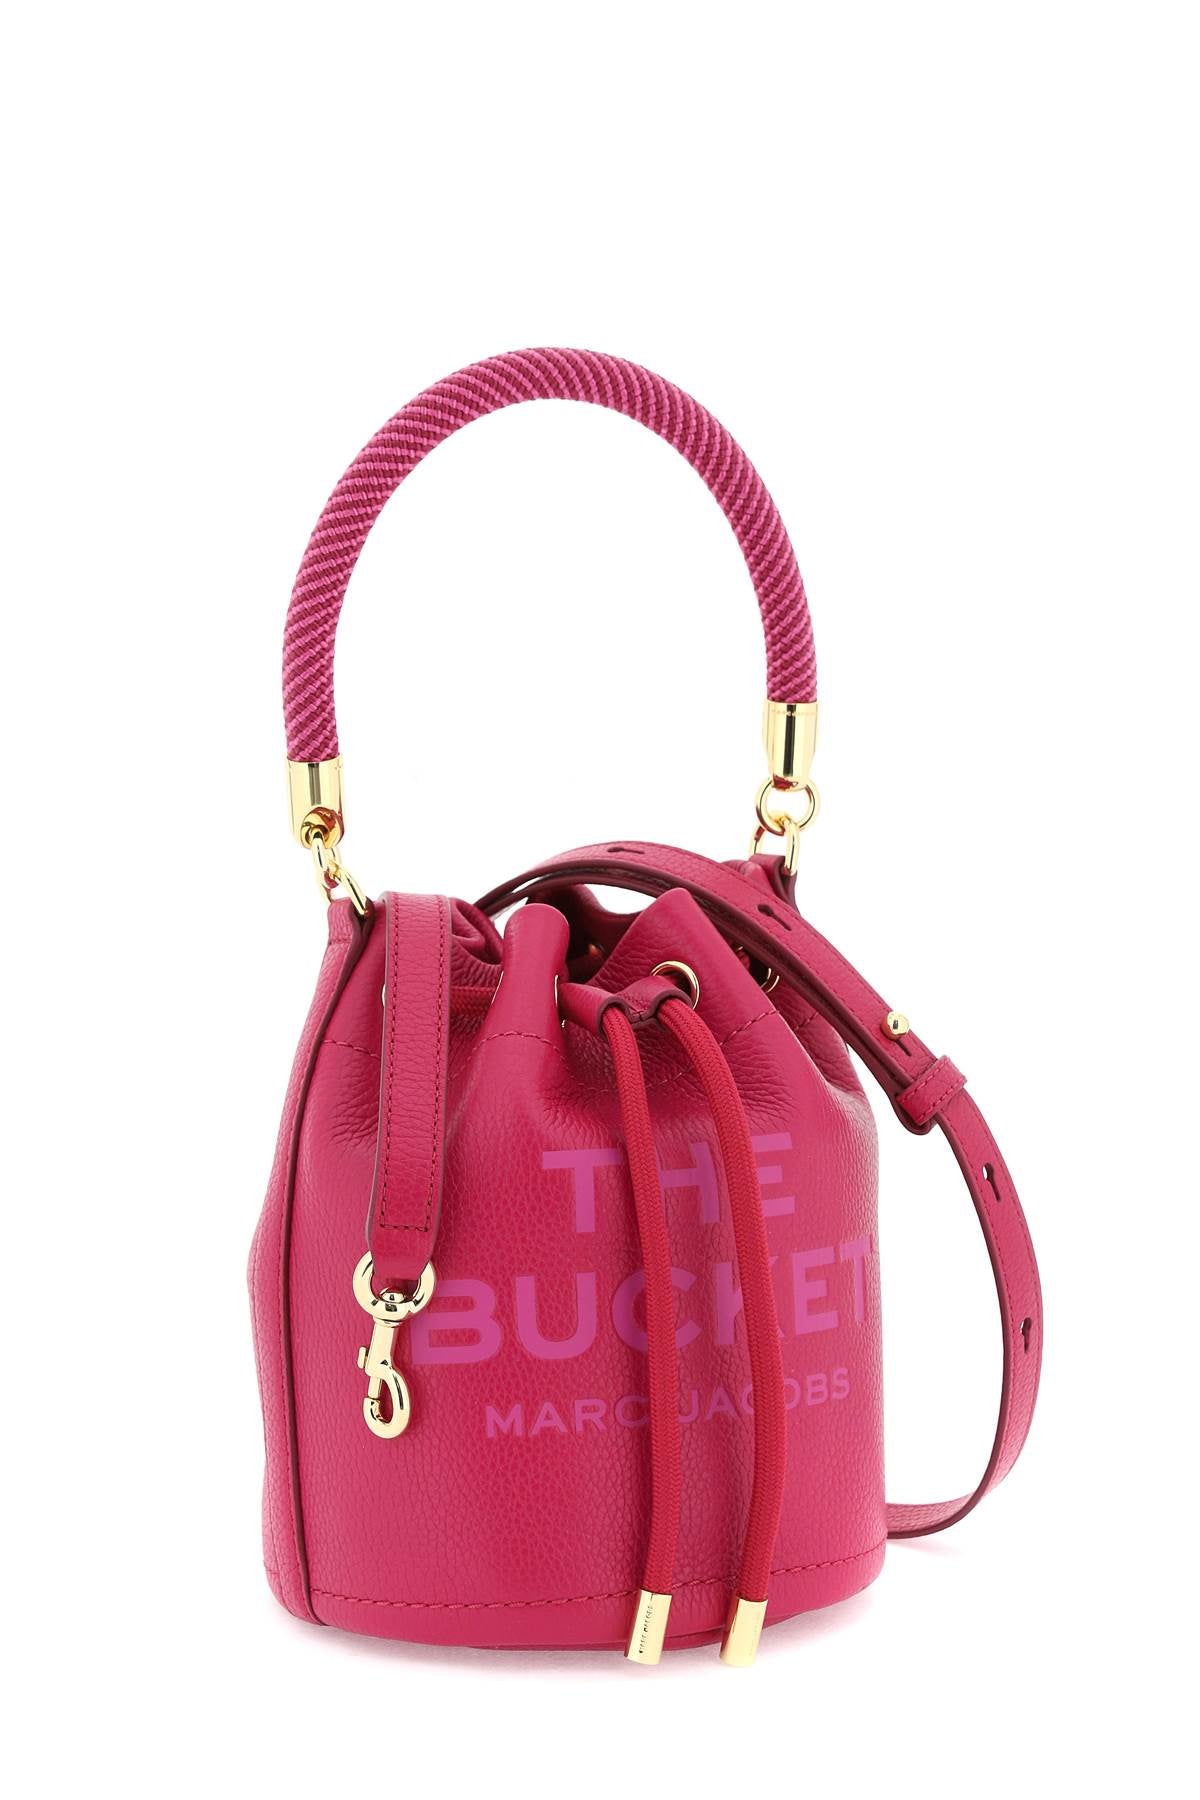 Marc jacobs the leather bucket bag-2